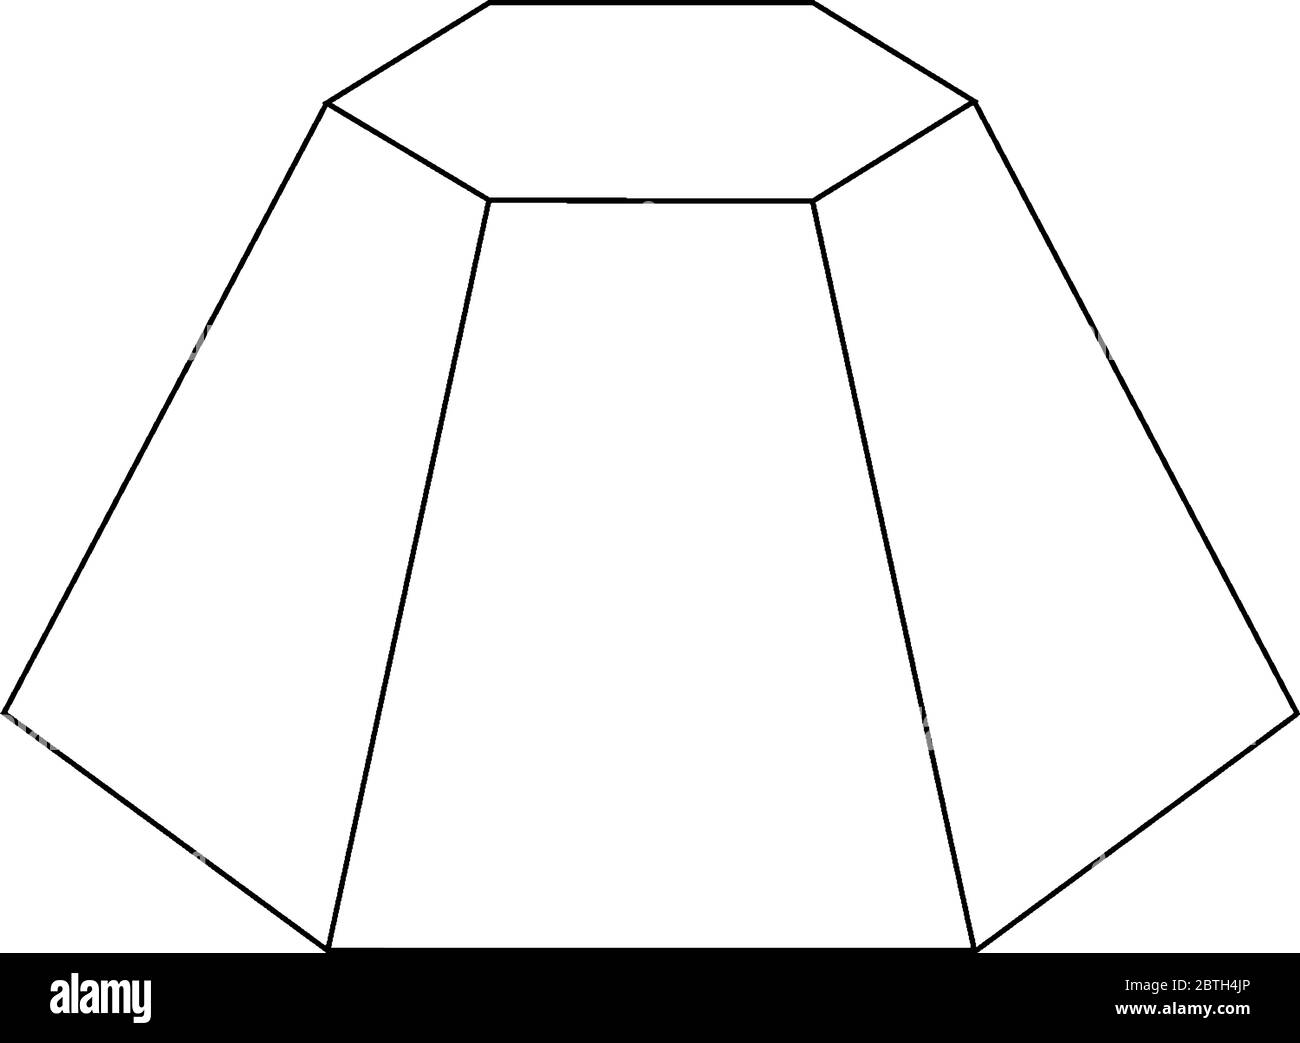 This is upside down Hexagonal frustum which is cut by plane parallel to the base of the hexagonal pyramid, vintage line drawing or engraving illustrat Stock Vector